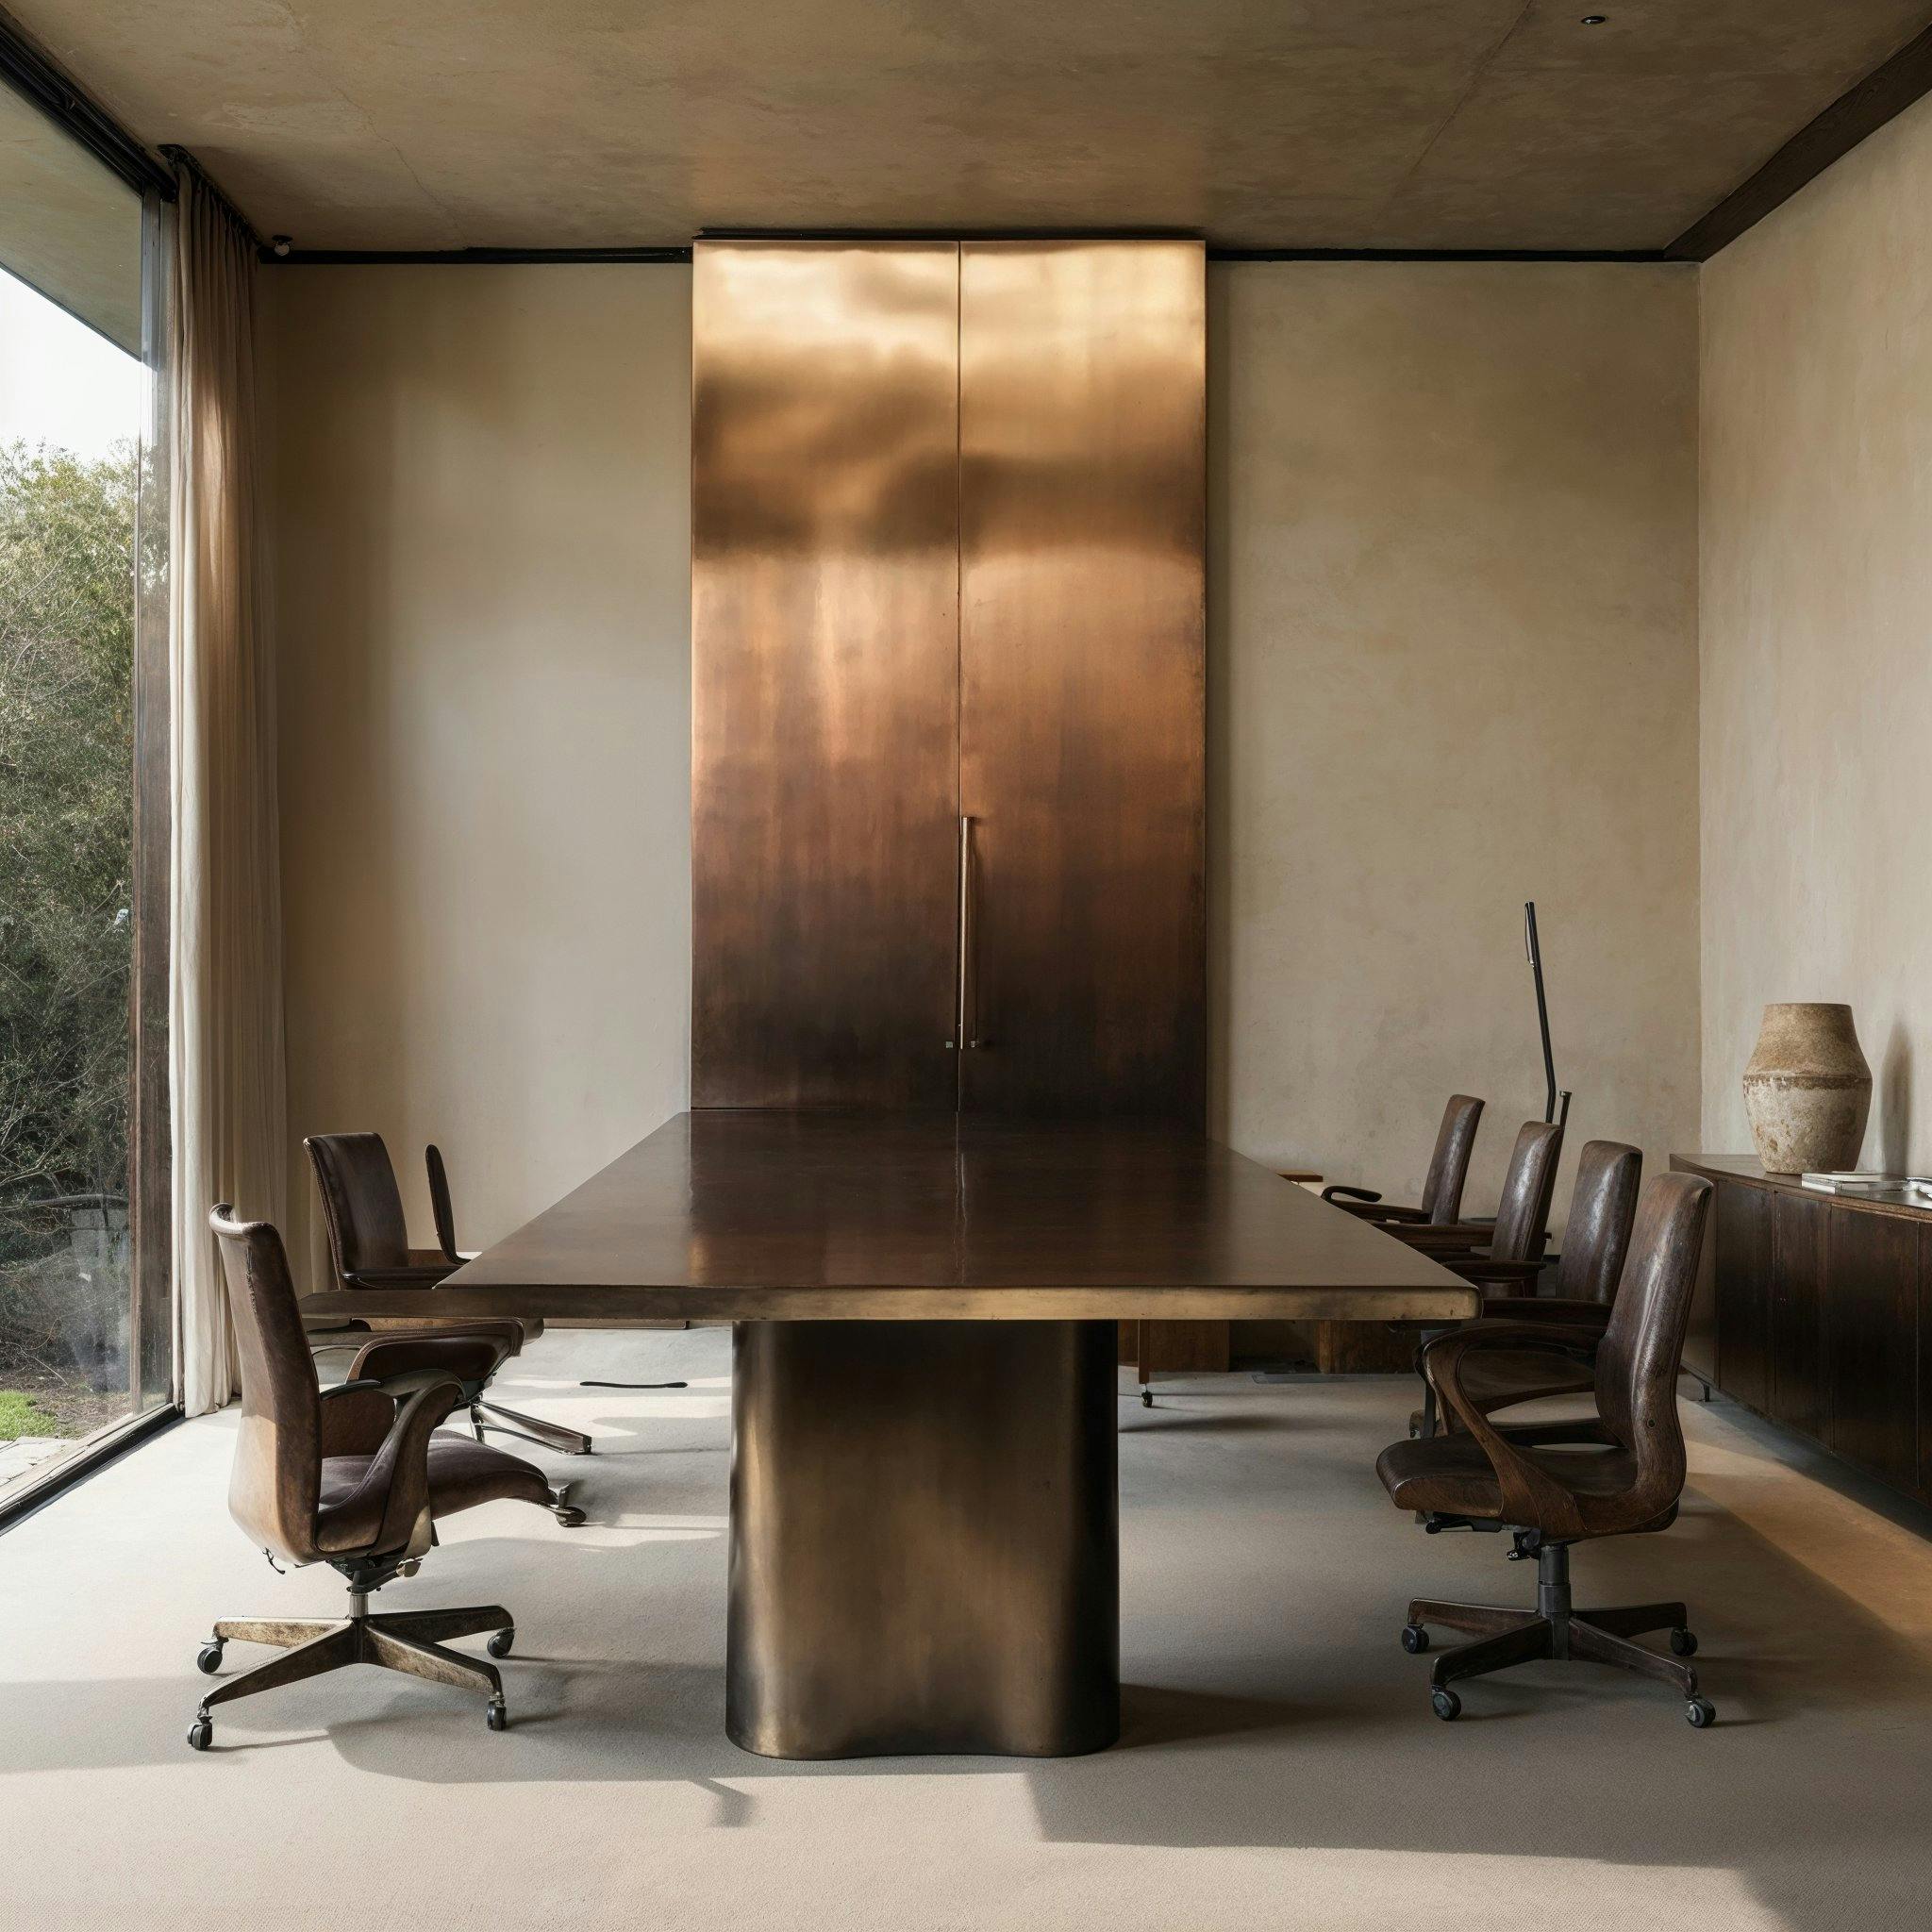 What if we imagine a Scene with an architect's office, a study in the beauty of industrial minimalism.